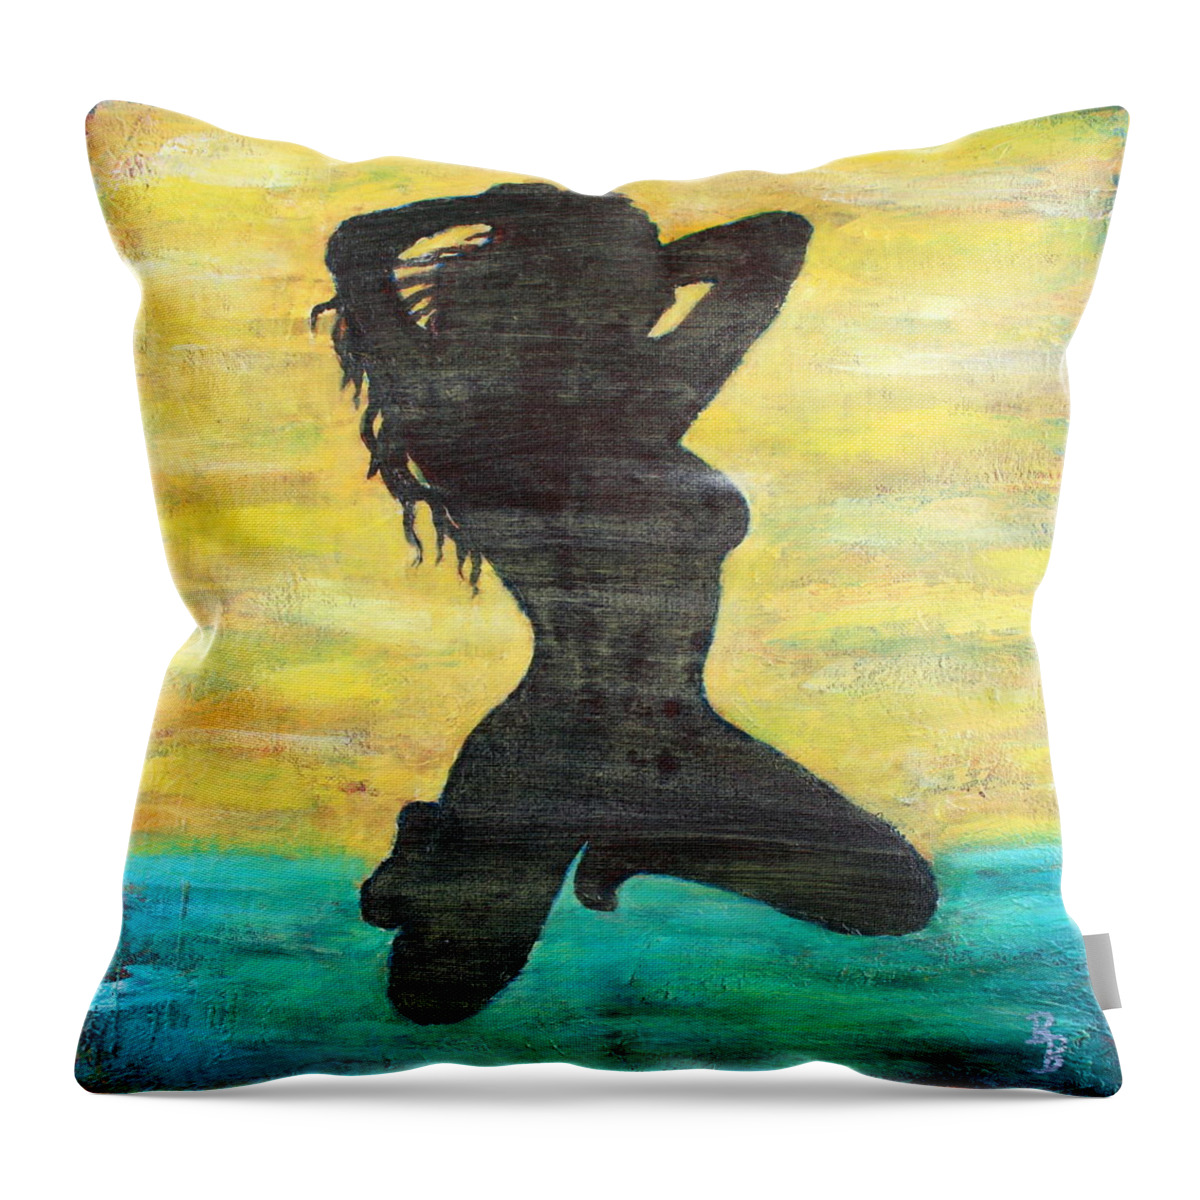 Grunge Throw Pillow featuring the painting Grunge Girl Female Silhouette Pop Art by Bob Baker